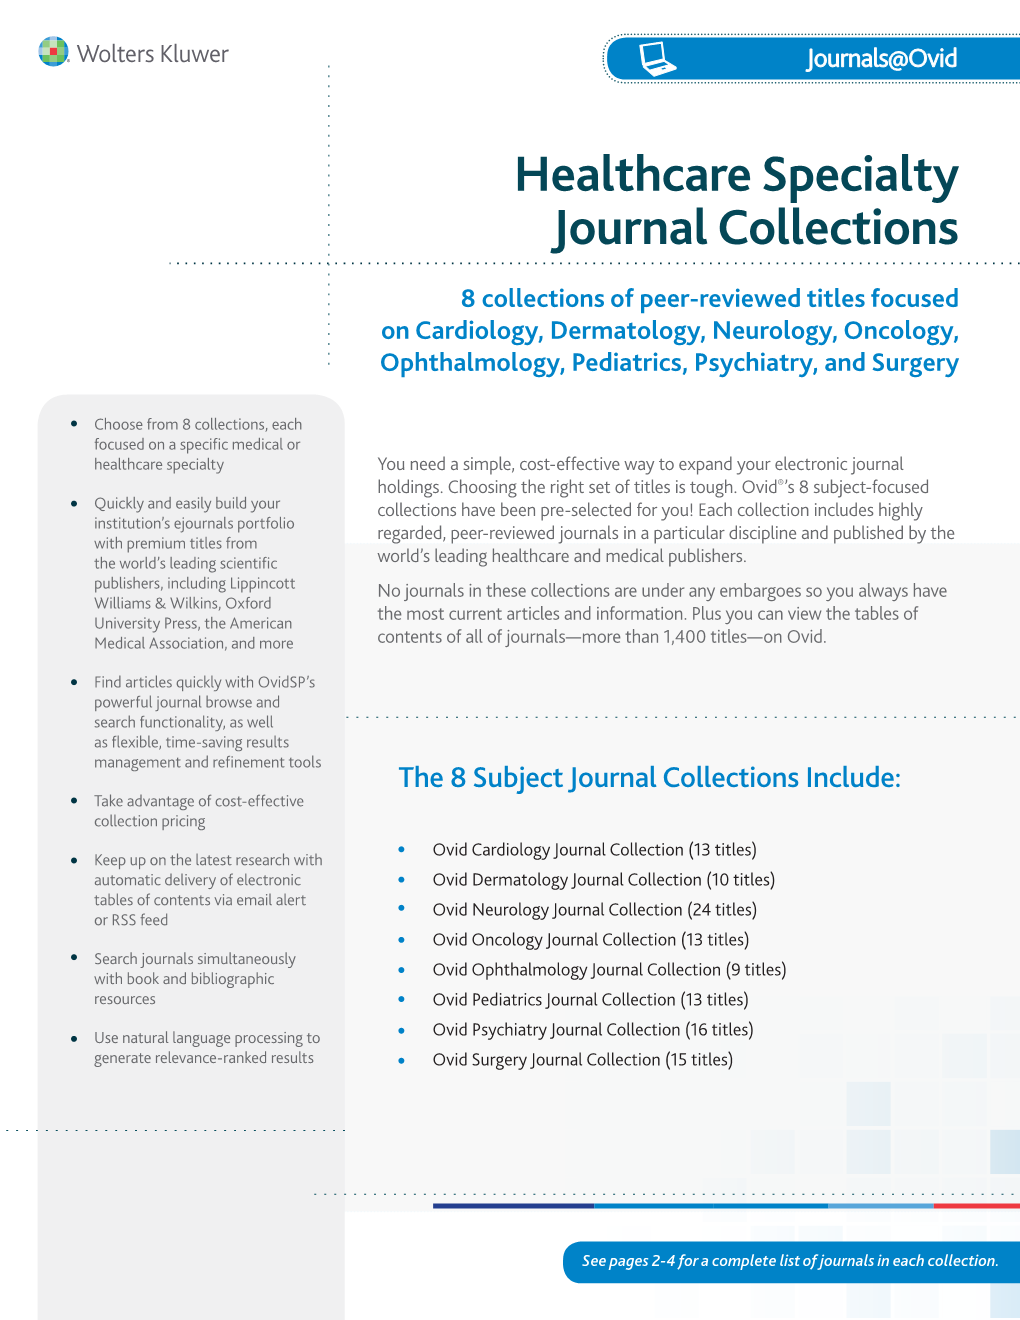 Healthcare Specialty Journal Collections